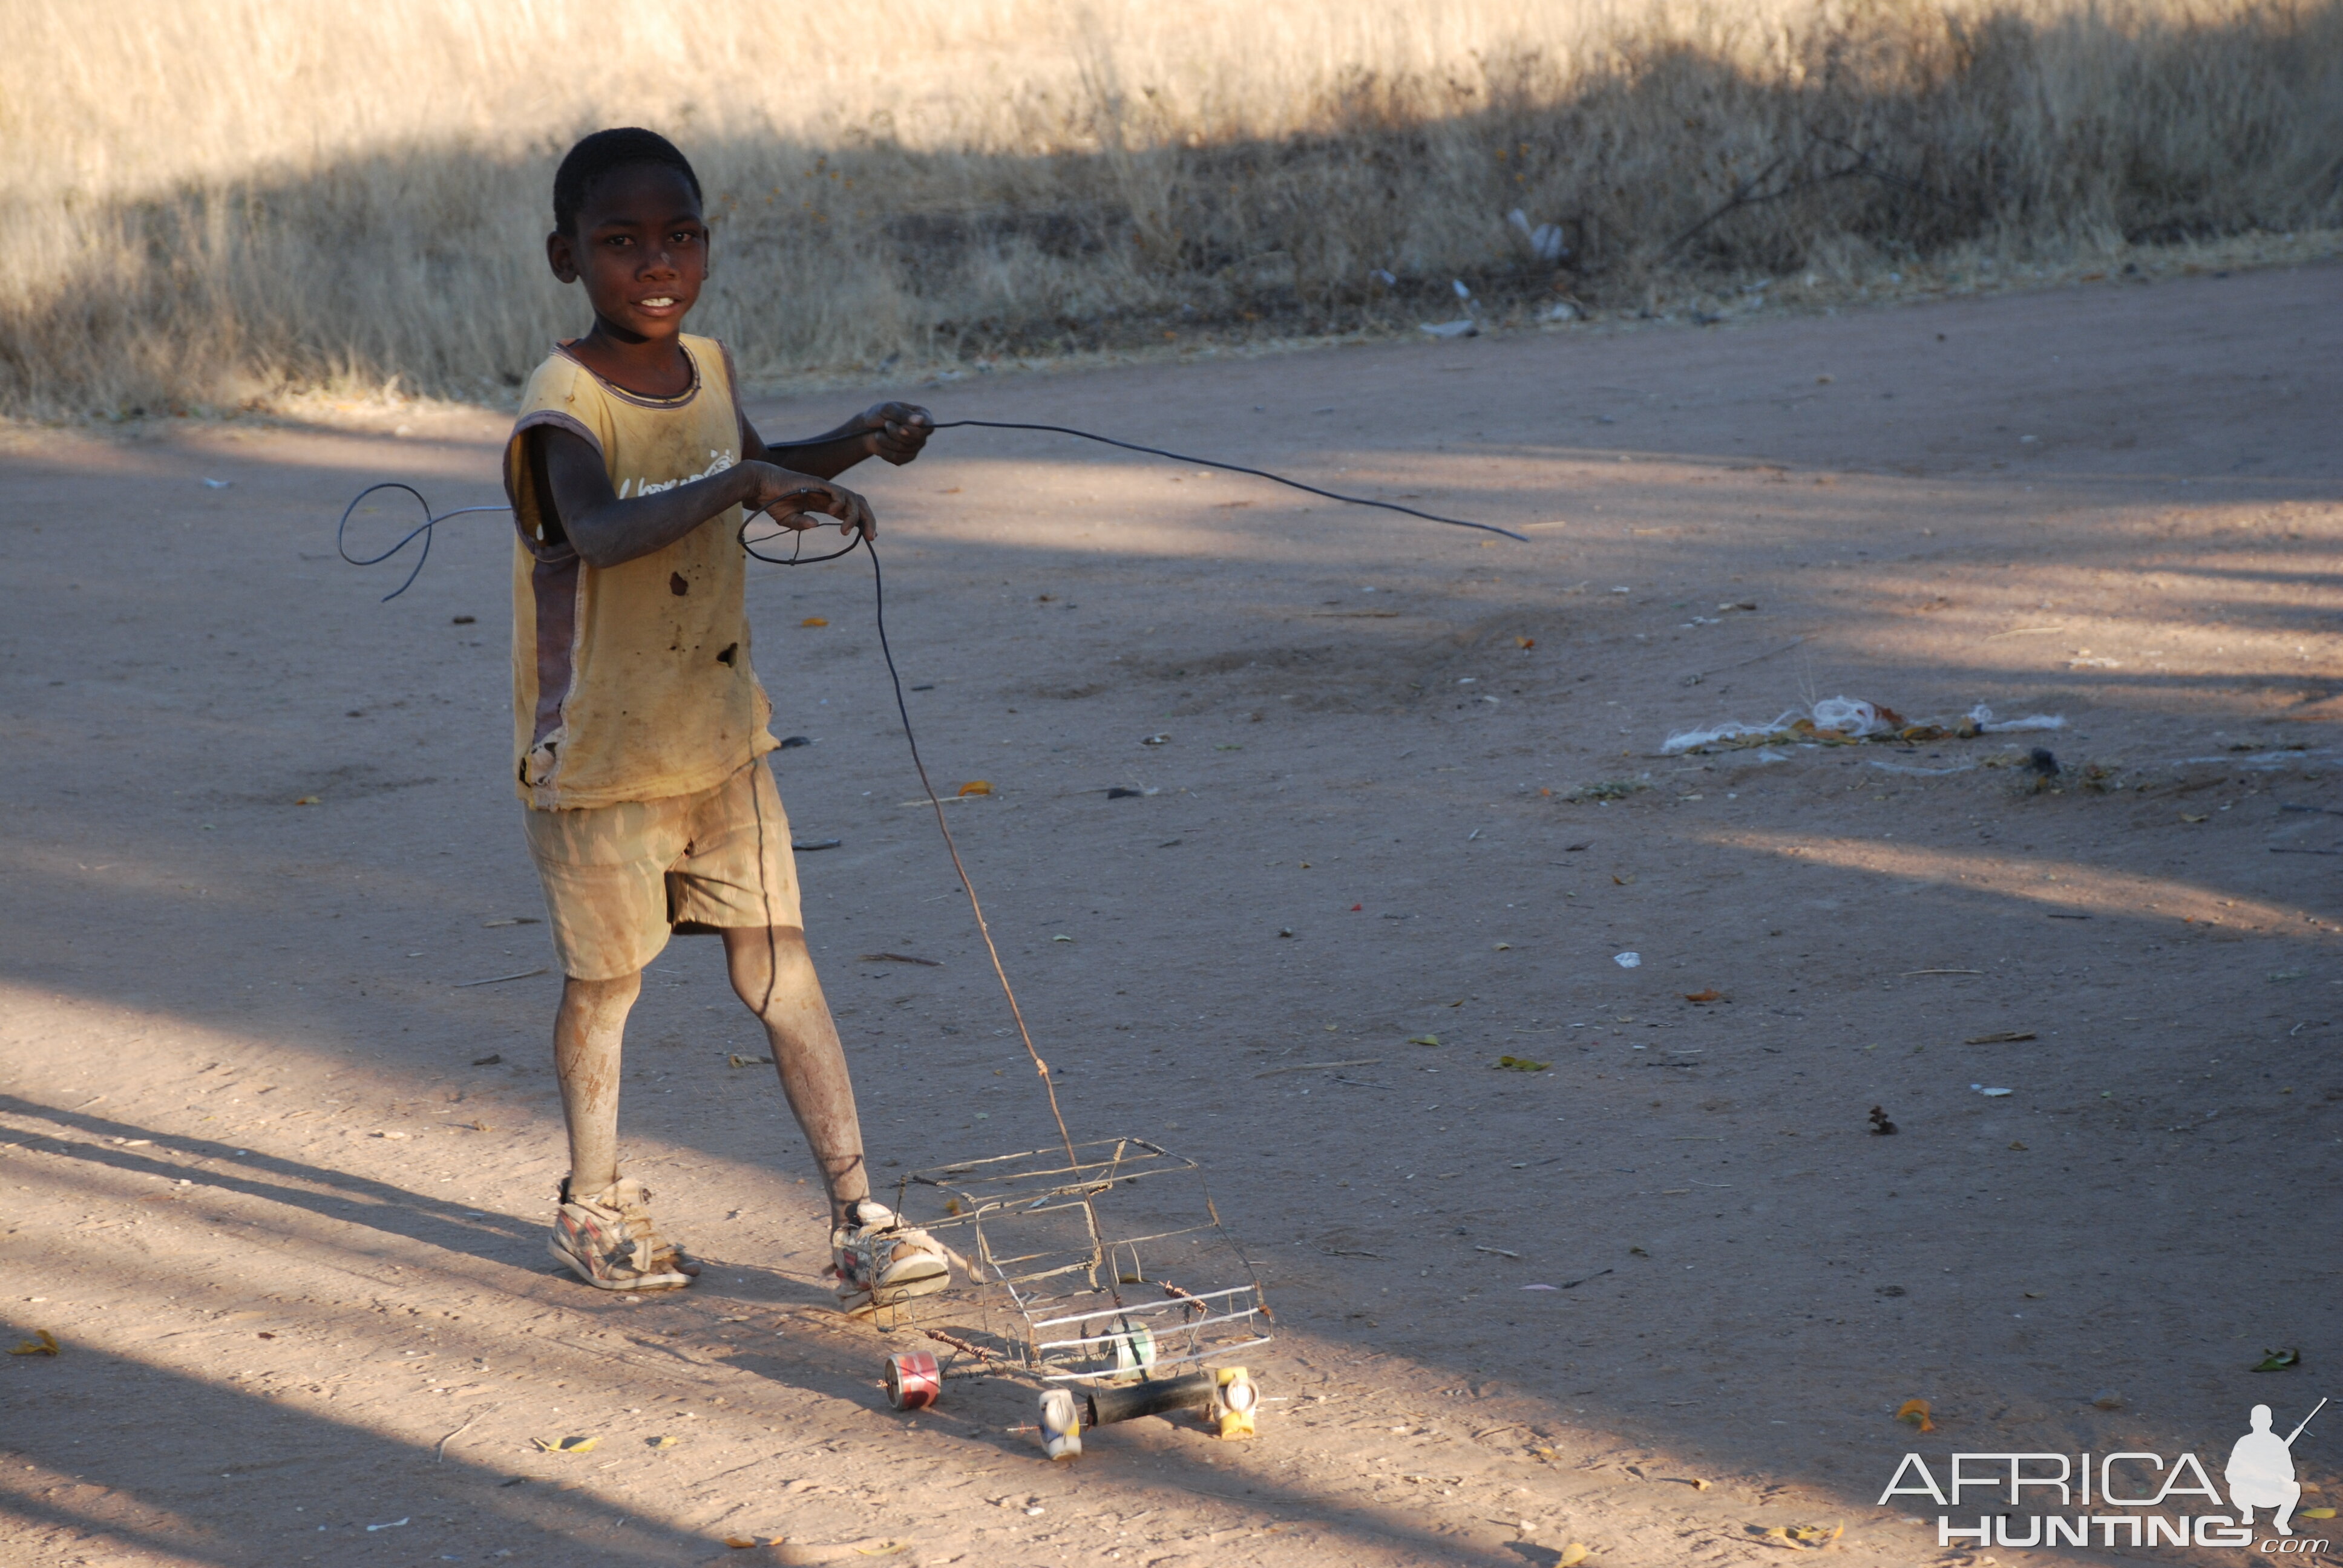 Little boy playing with his car, Namibia